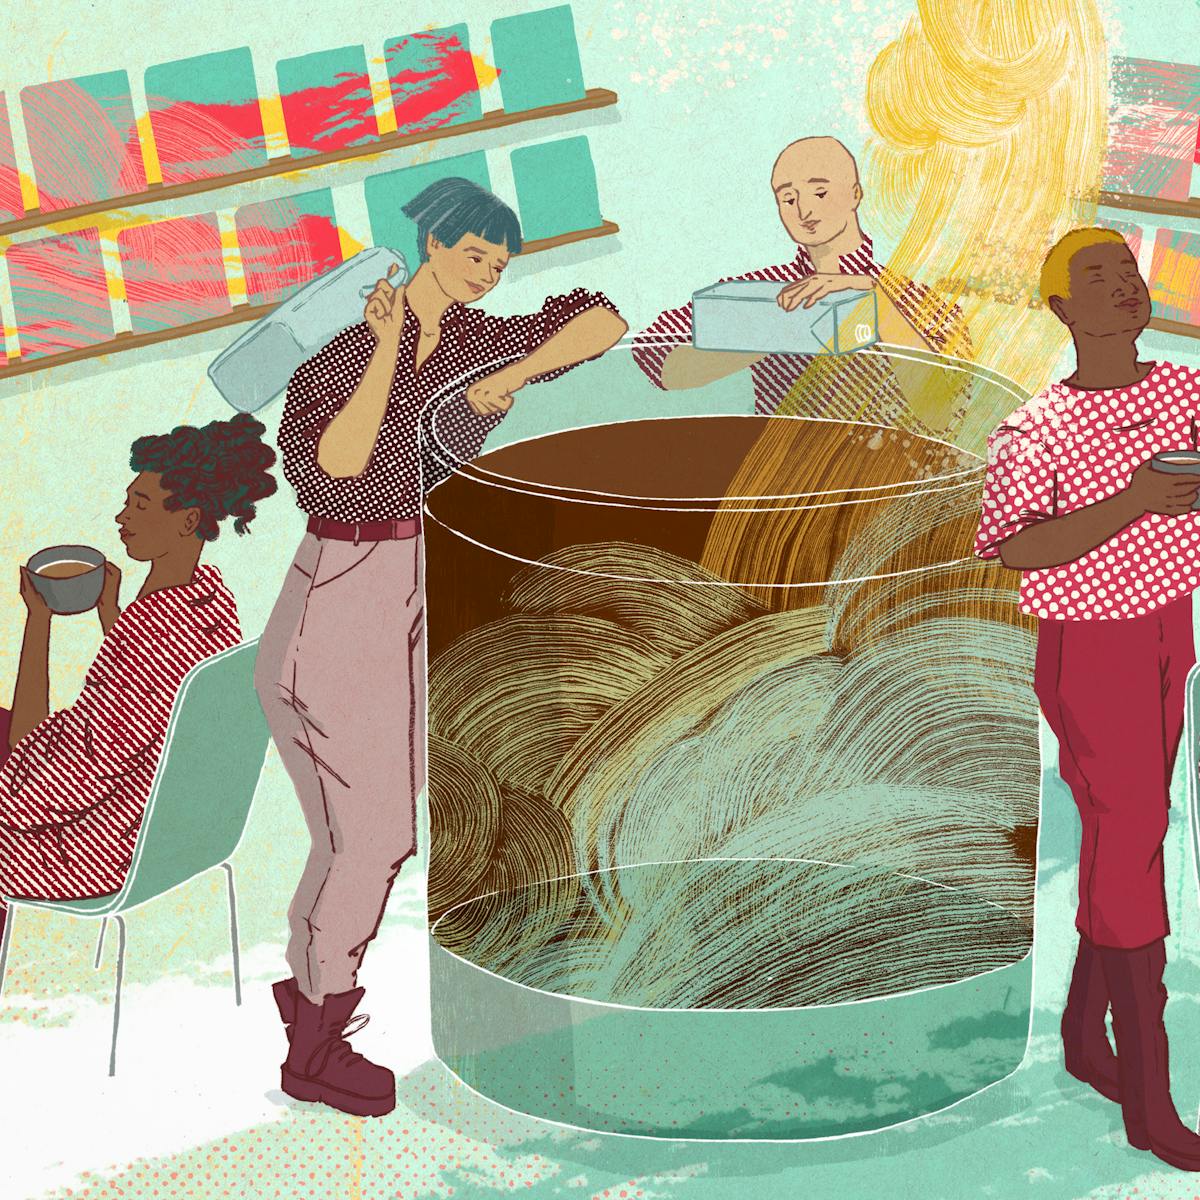 A digital illustration of people in a café, gathered around a large cup of coffee. The two central figures are pouring cartons of oat milk into the coffee, while others are relaxing by themselves or are in conversation with other patrons. There are large swirls of steam coming from the coffee, behind which there are shelves of books and artworks, there is alsoa stream of oatmilk on the floor.